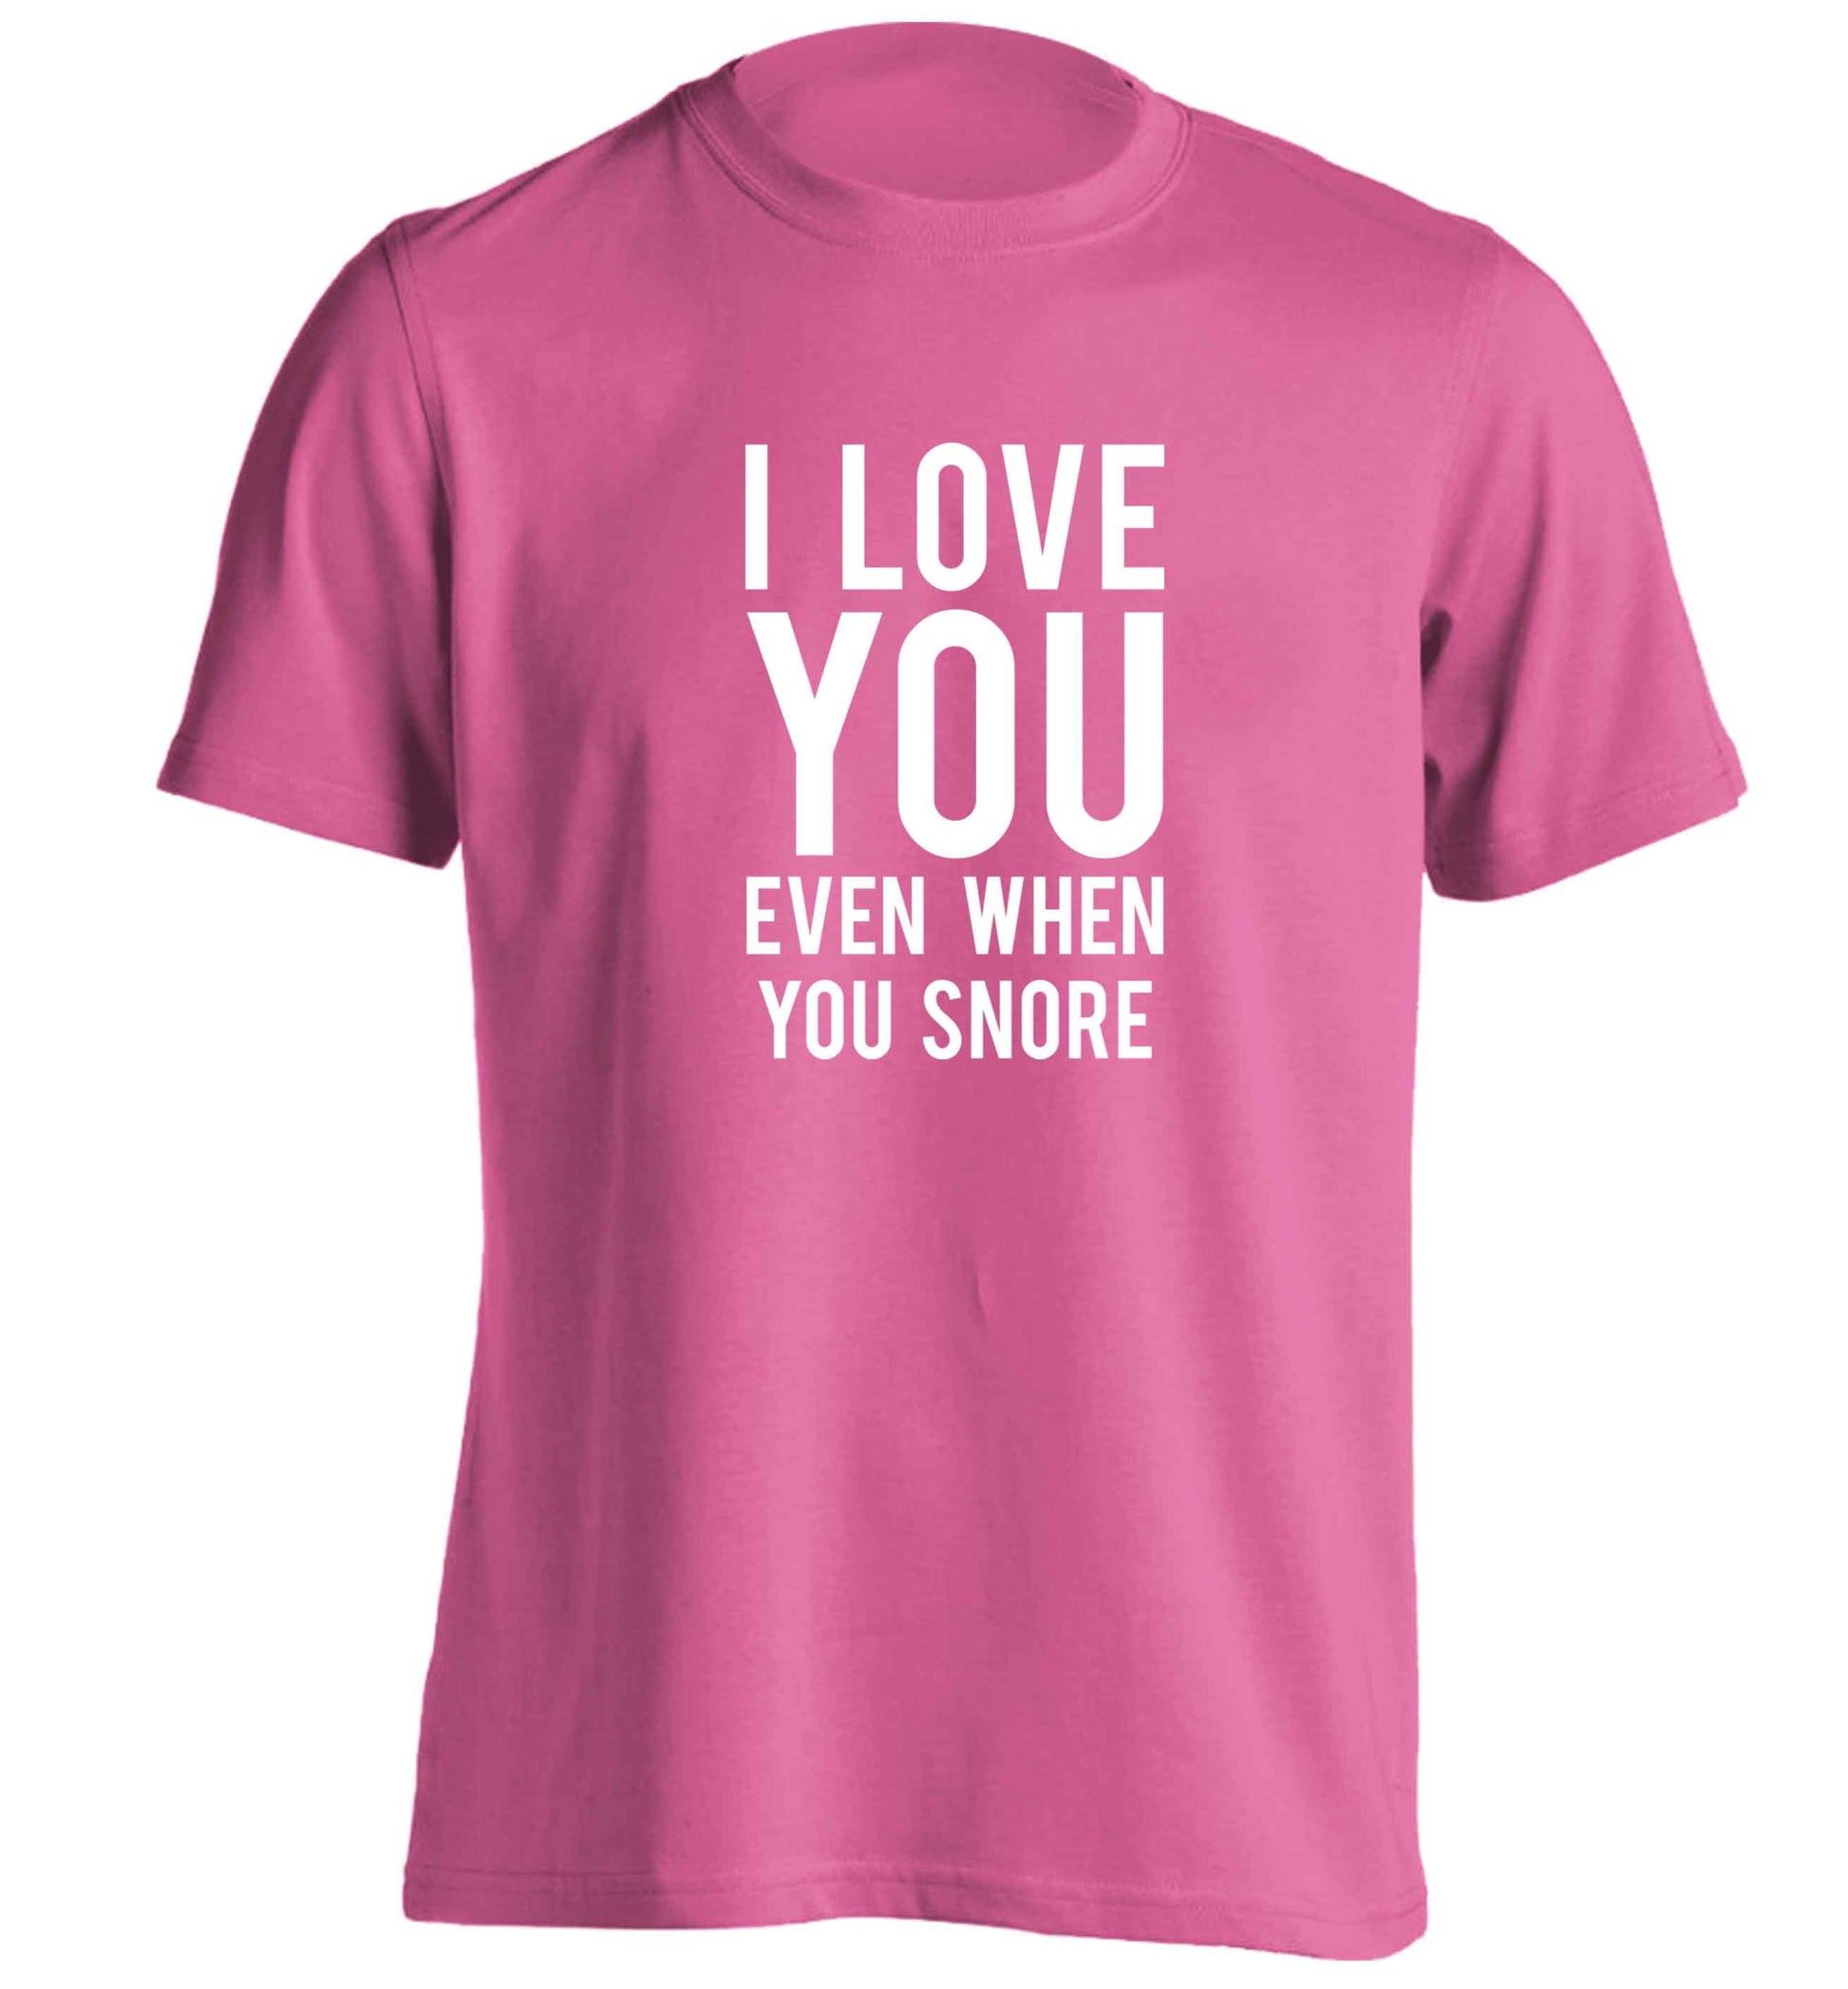 I love you even when you snore adults unisex pink Tshirt 2XL